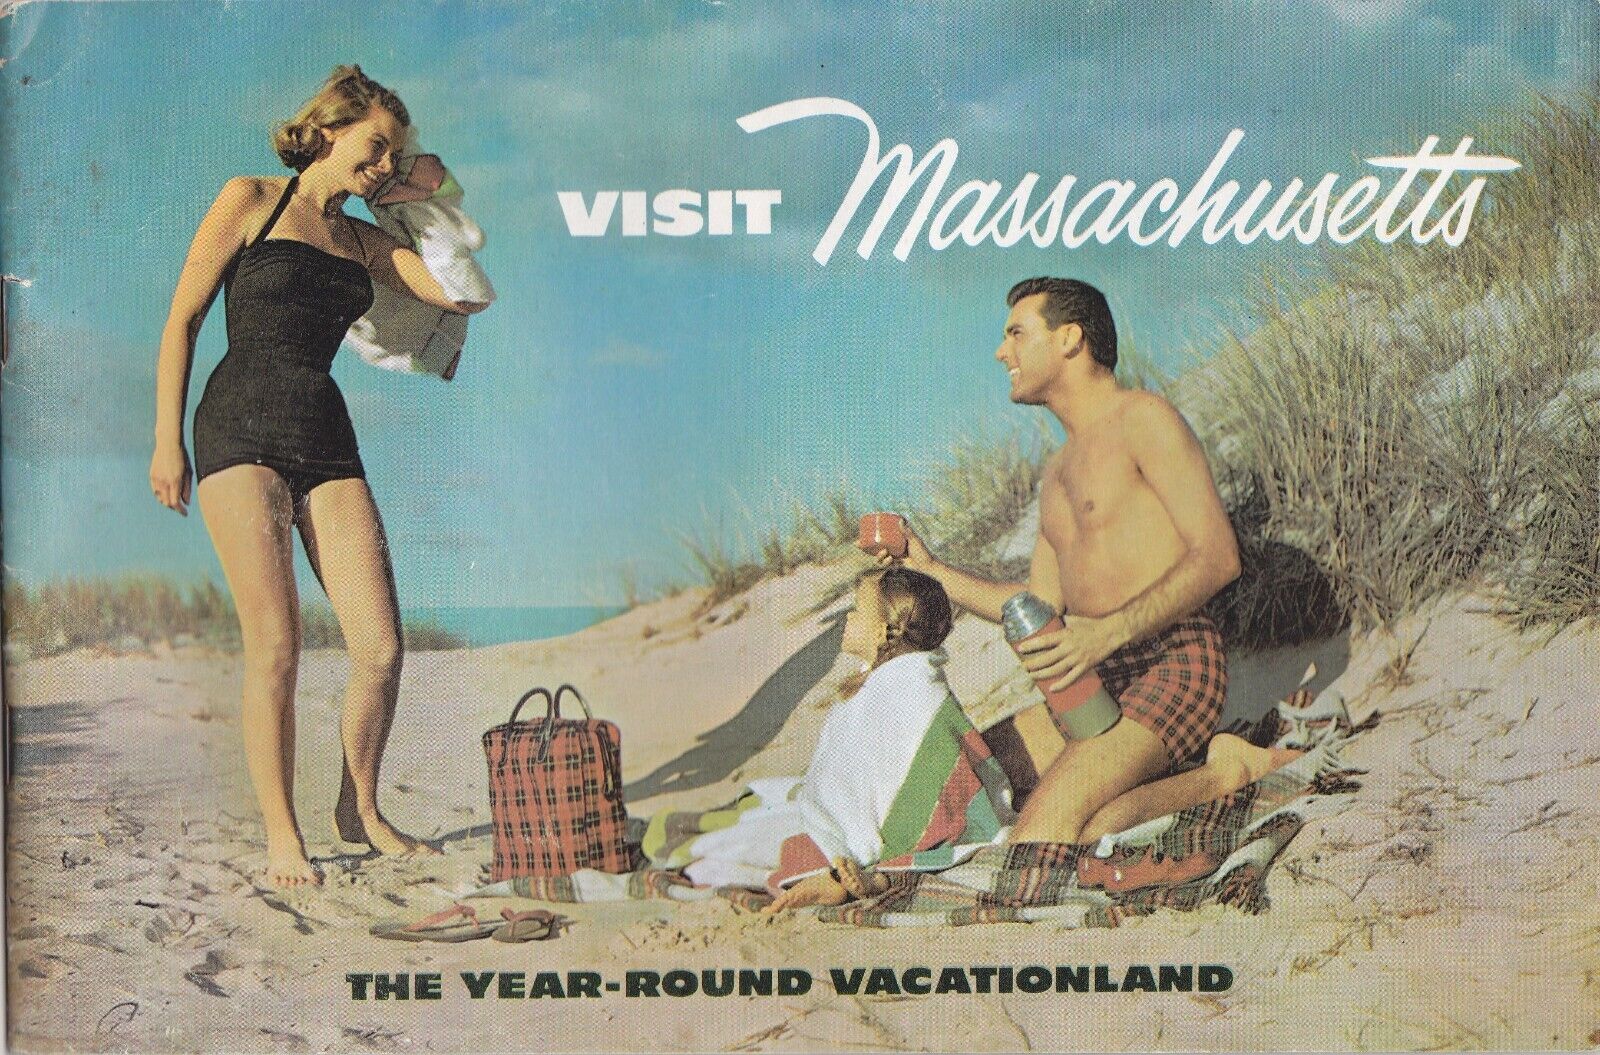 1964 Massachusetts State Tourism Promotional Booklet